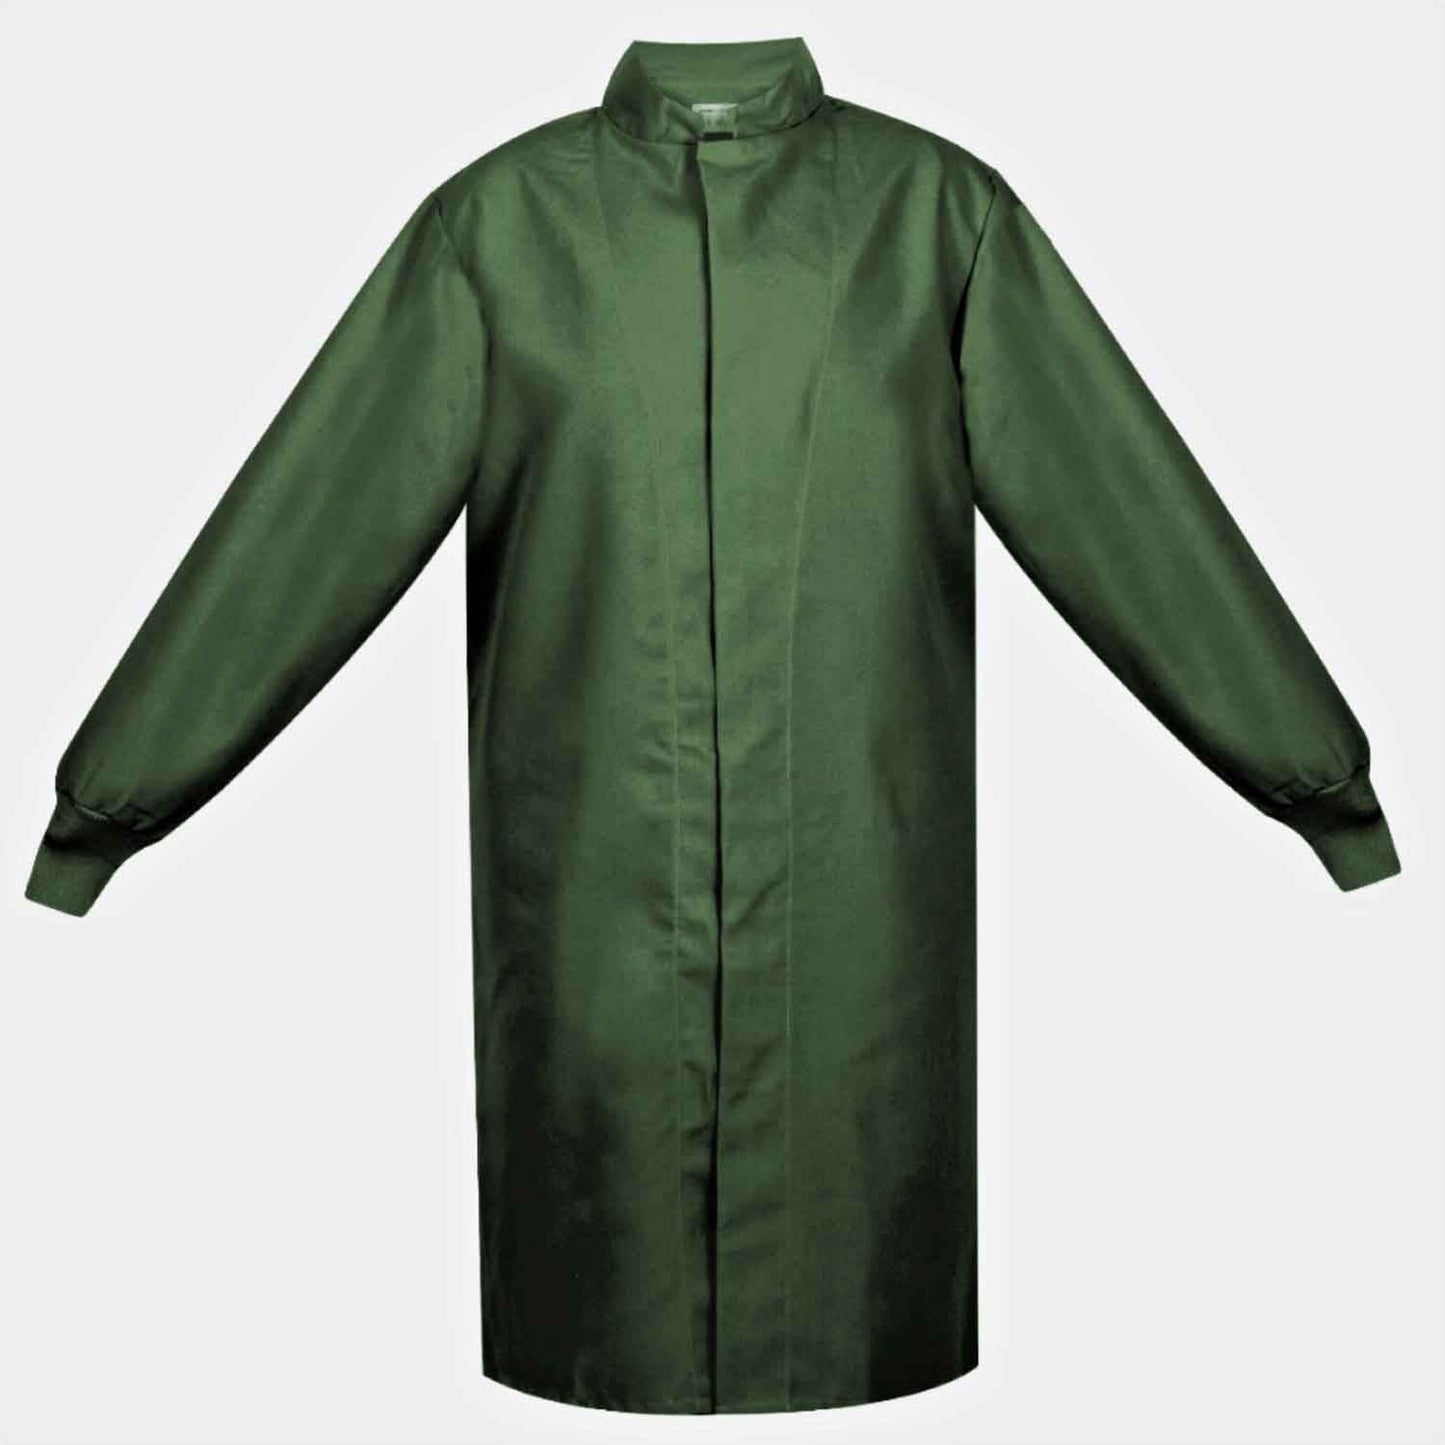 American Dawn | X-Small Forest Green Lab Coat With Long Sleeves And No Pockets